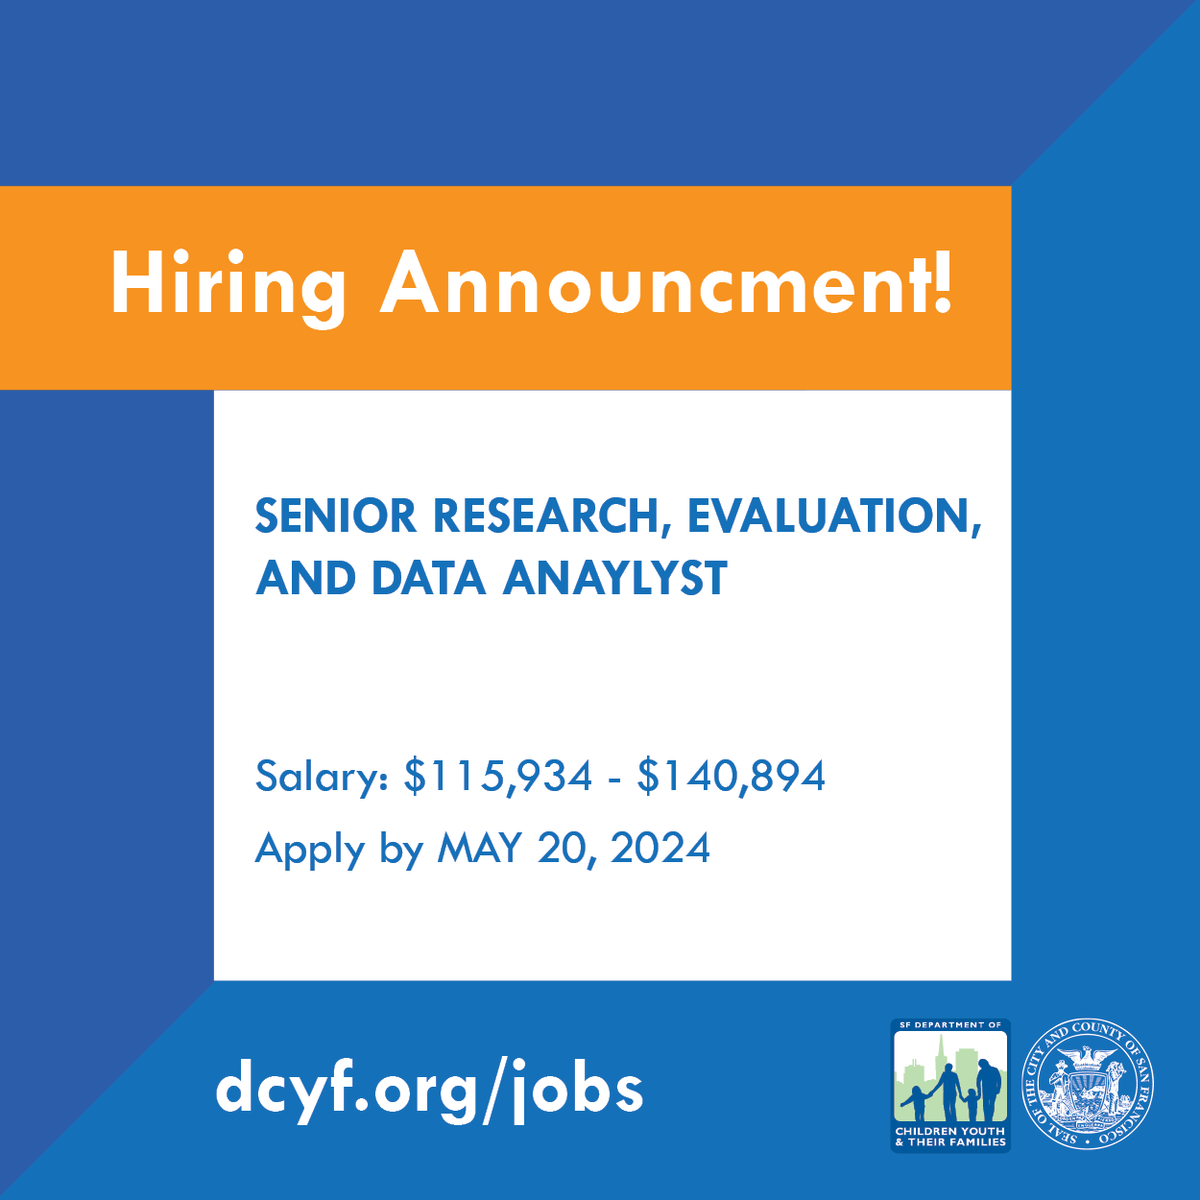 We are hiring a Senior Research, Evaluation, and Data Analyst, and many of our grantees and partners have open positions. Visit our Jobs page to learn more: dcyf.org/jobs